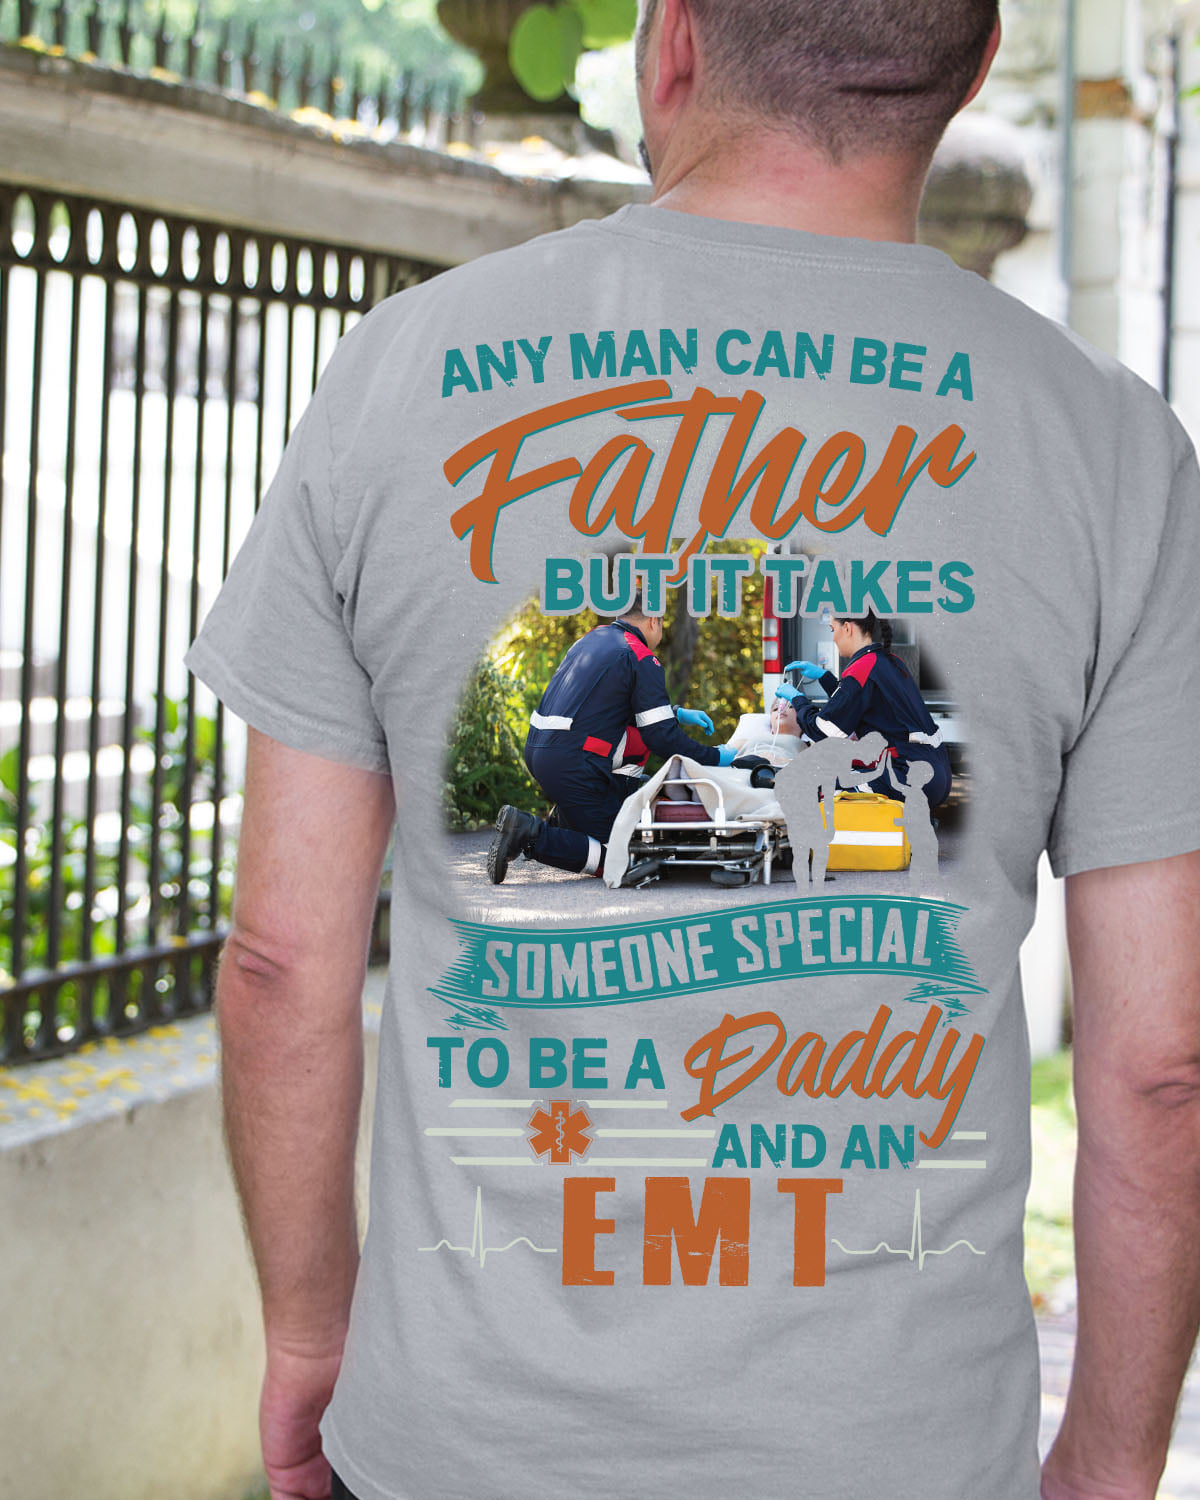 Any man can be a father but it takes some special to be a daddy and EMT